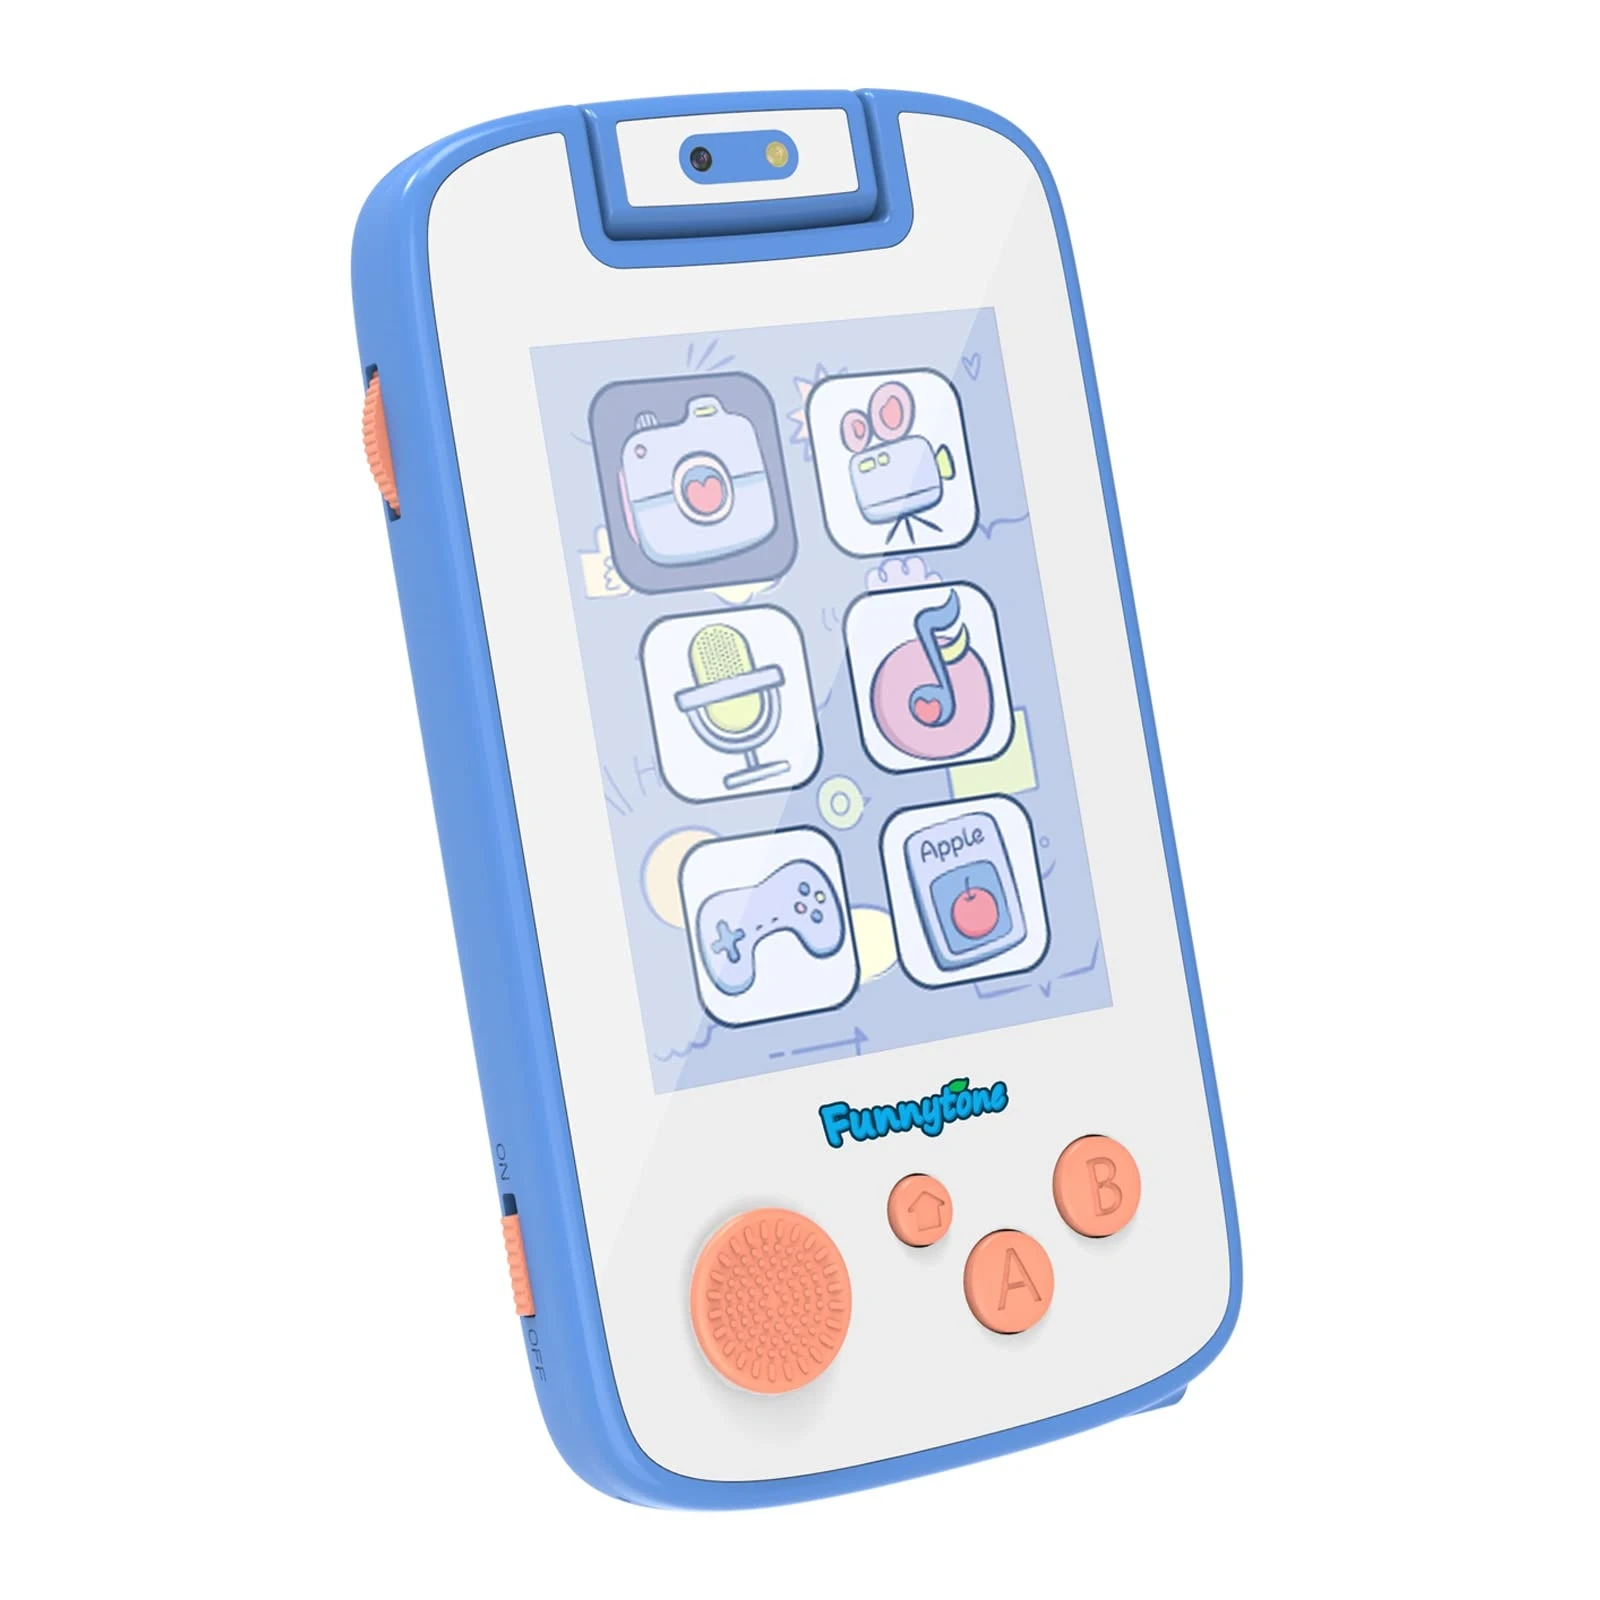 Kids Phone Toy Mobile phones MP3 Music Player Toy with Common Sense Card Electronic Learning & Education Cell phone